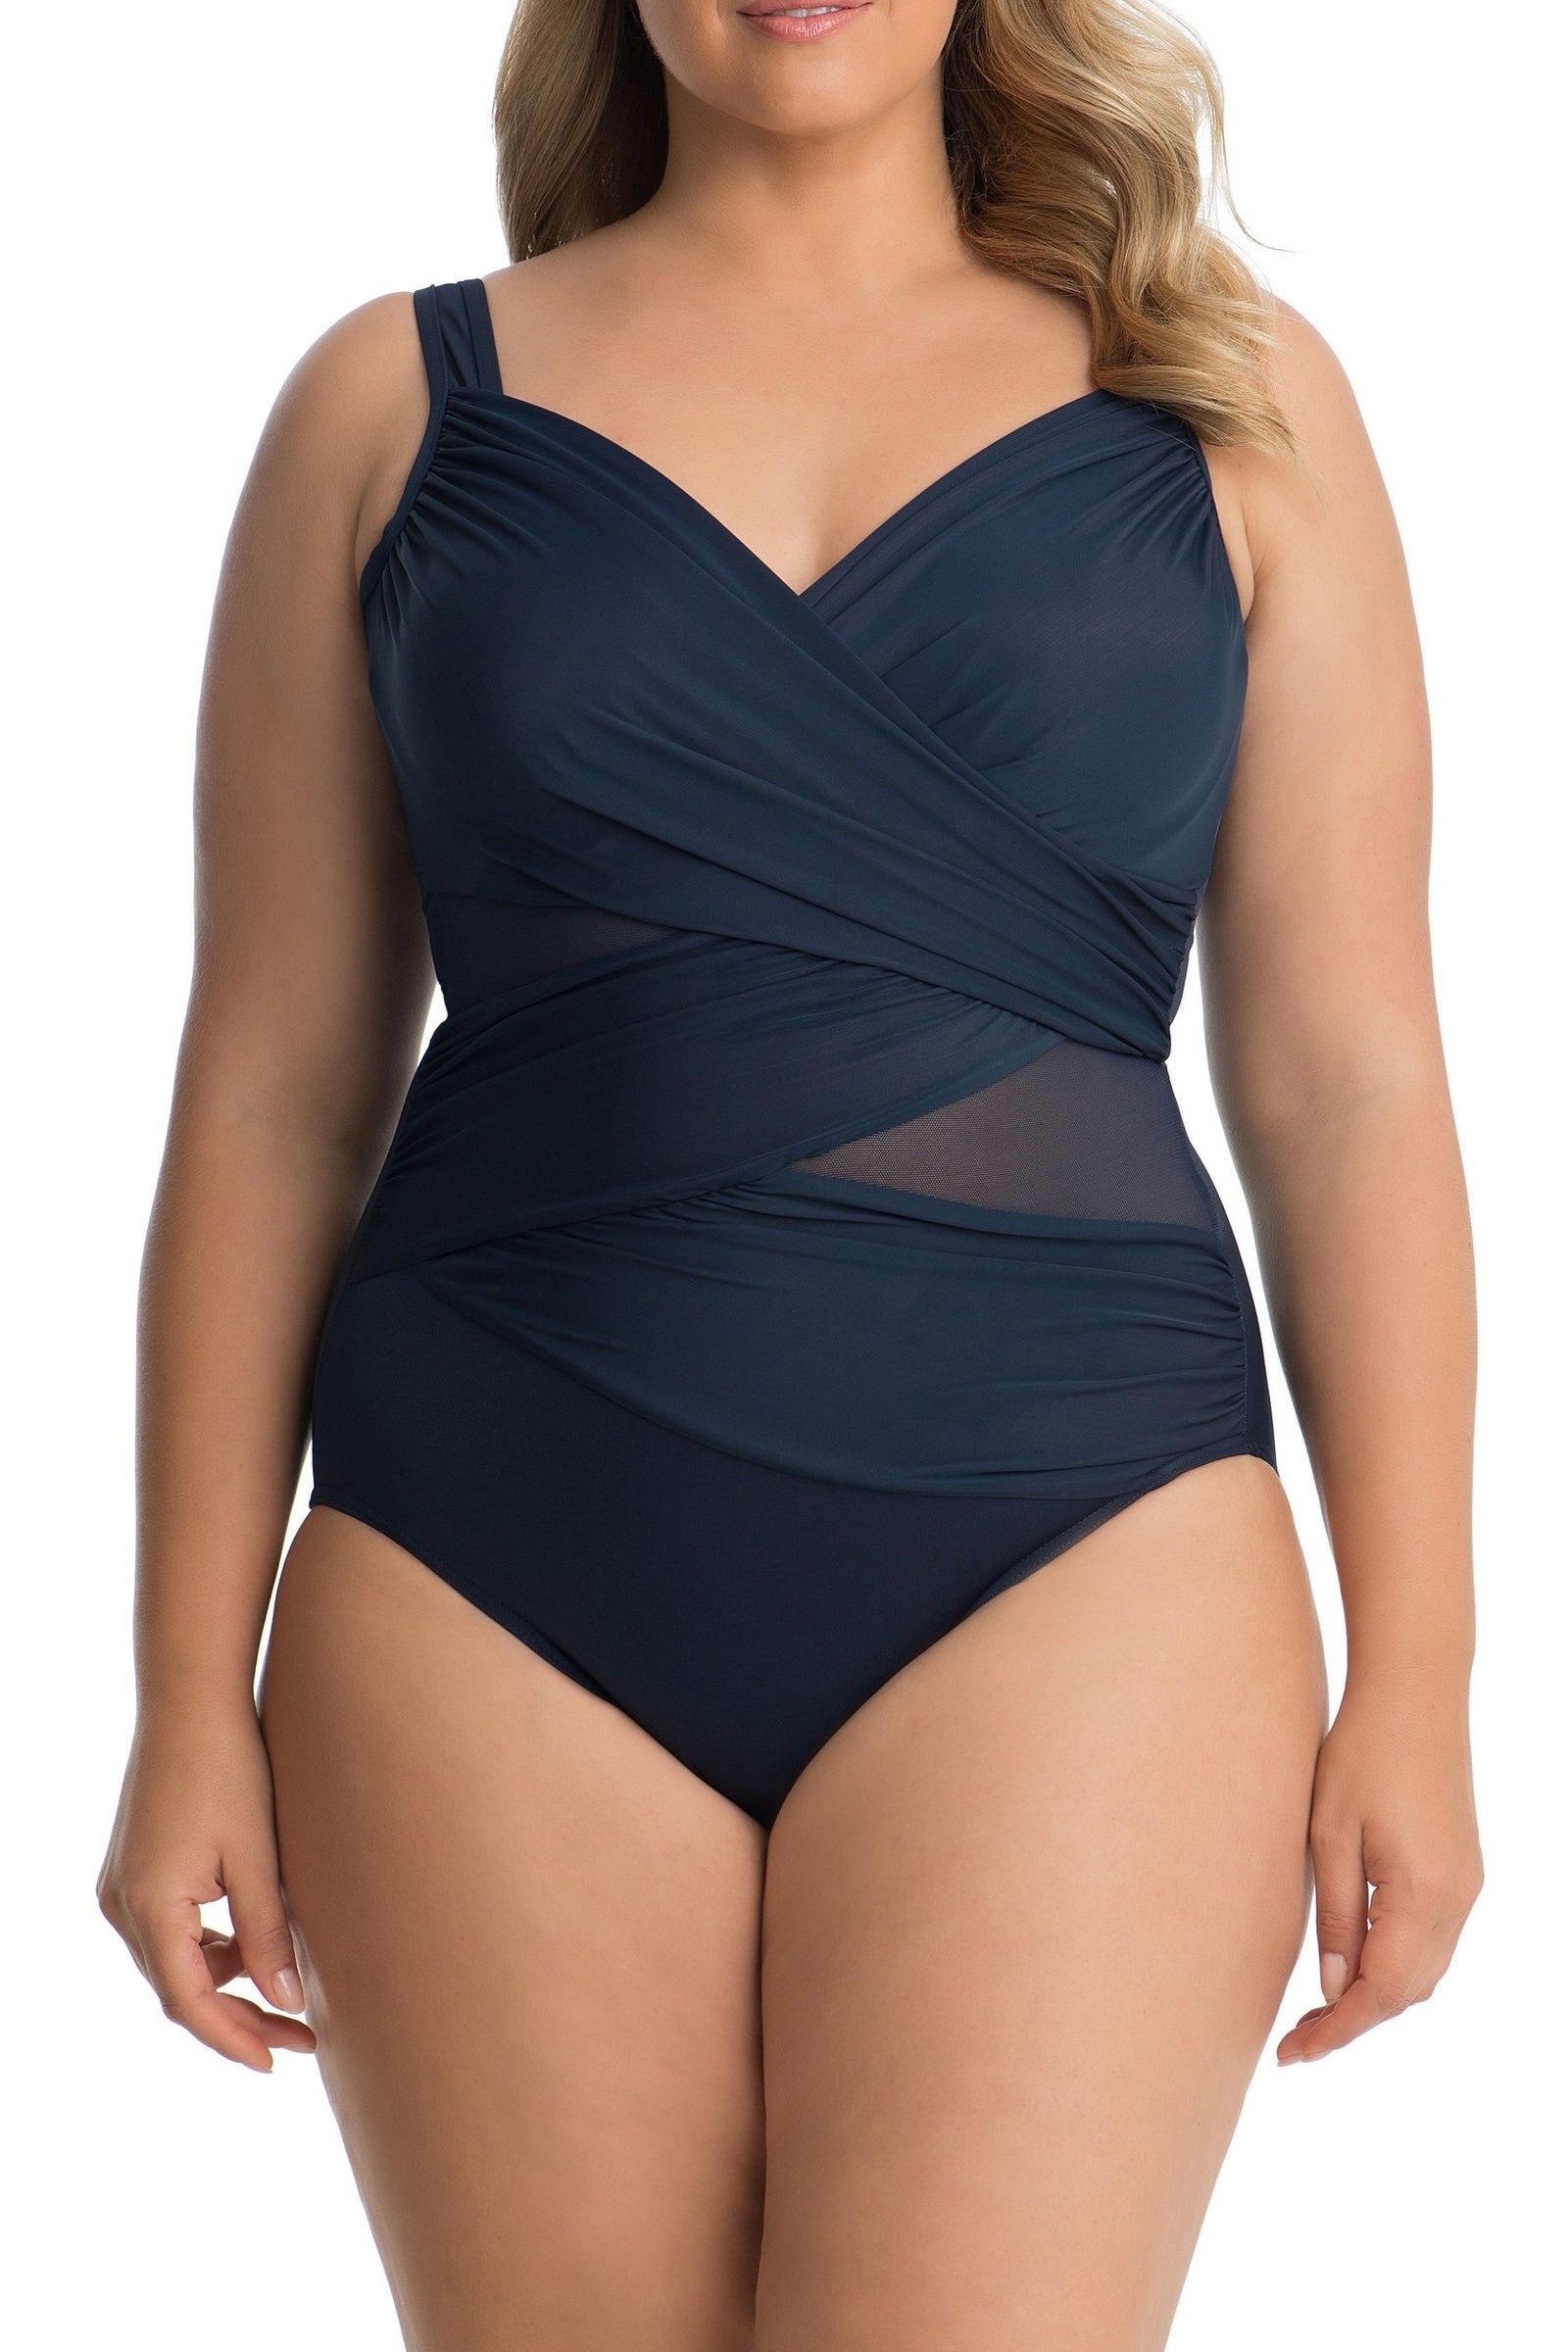 Hobie Swimwear Part of Your Swirl Bralette Midkini Top at